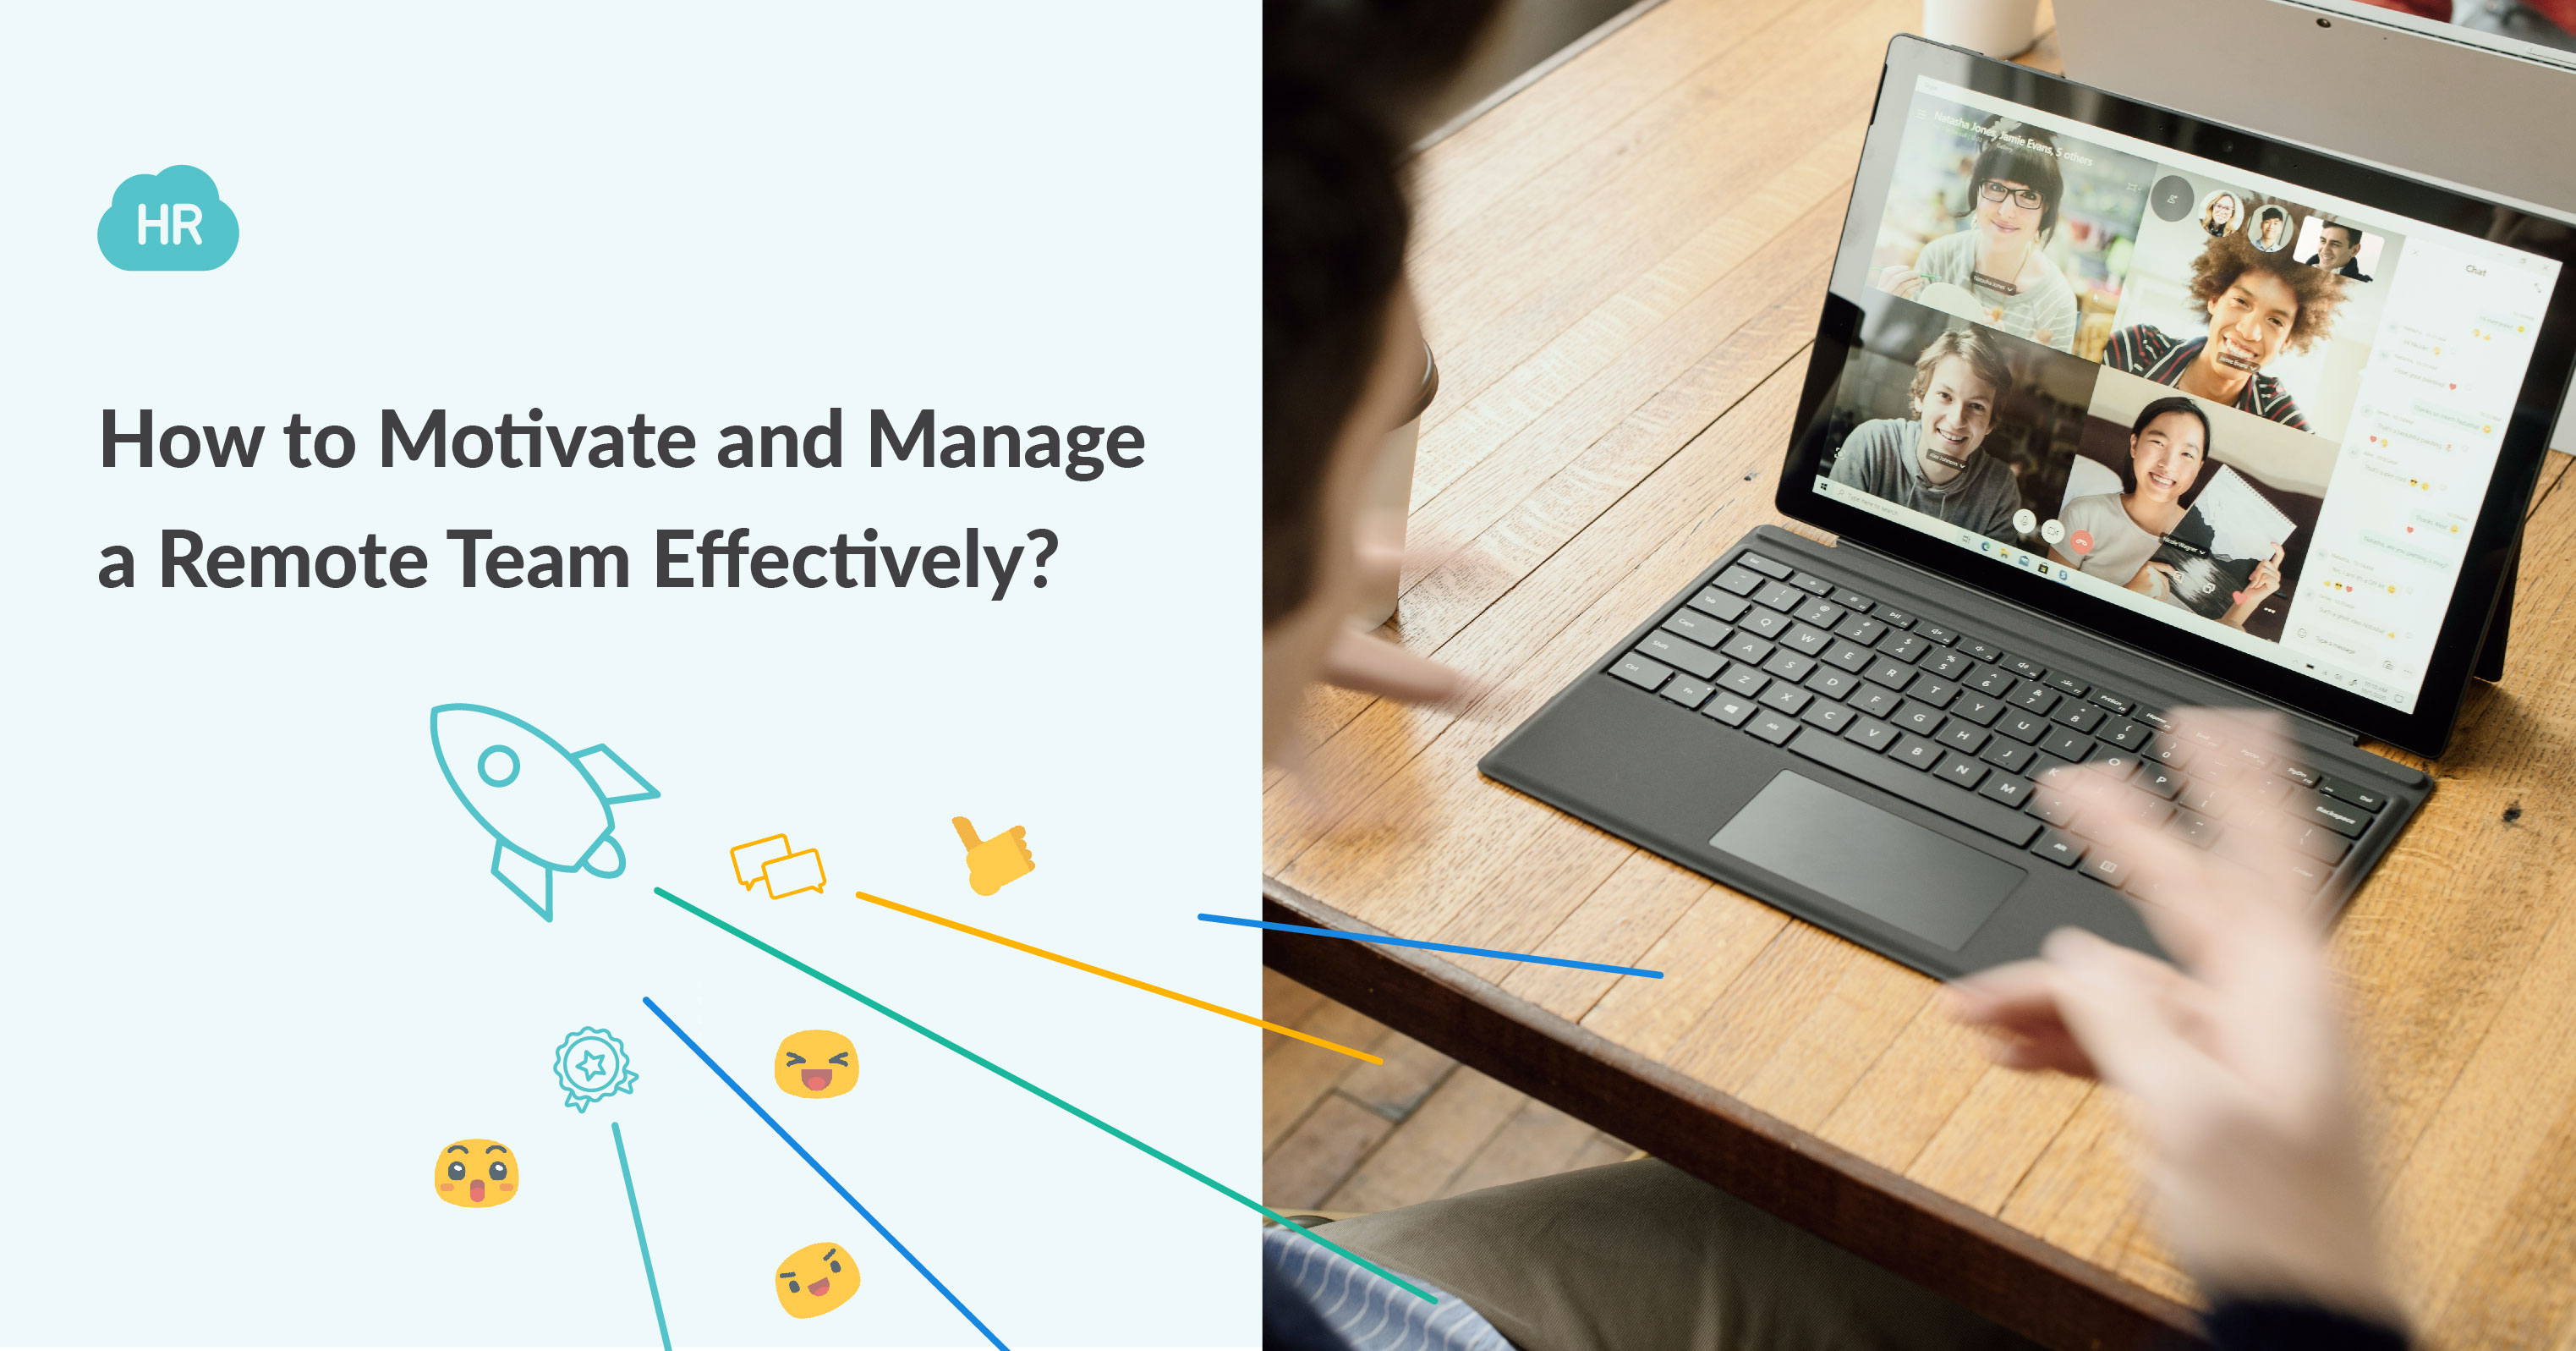 How to Motivate and Manage a Remote Team Effectively?